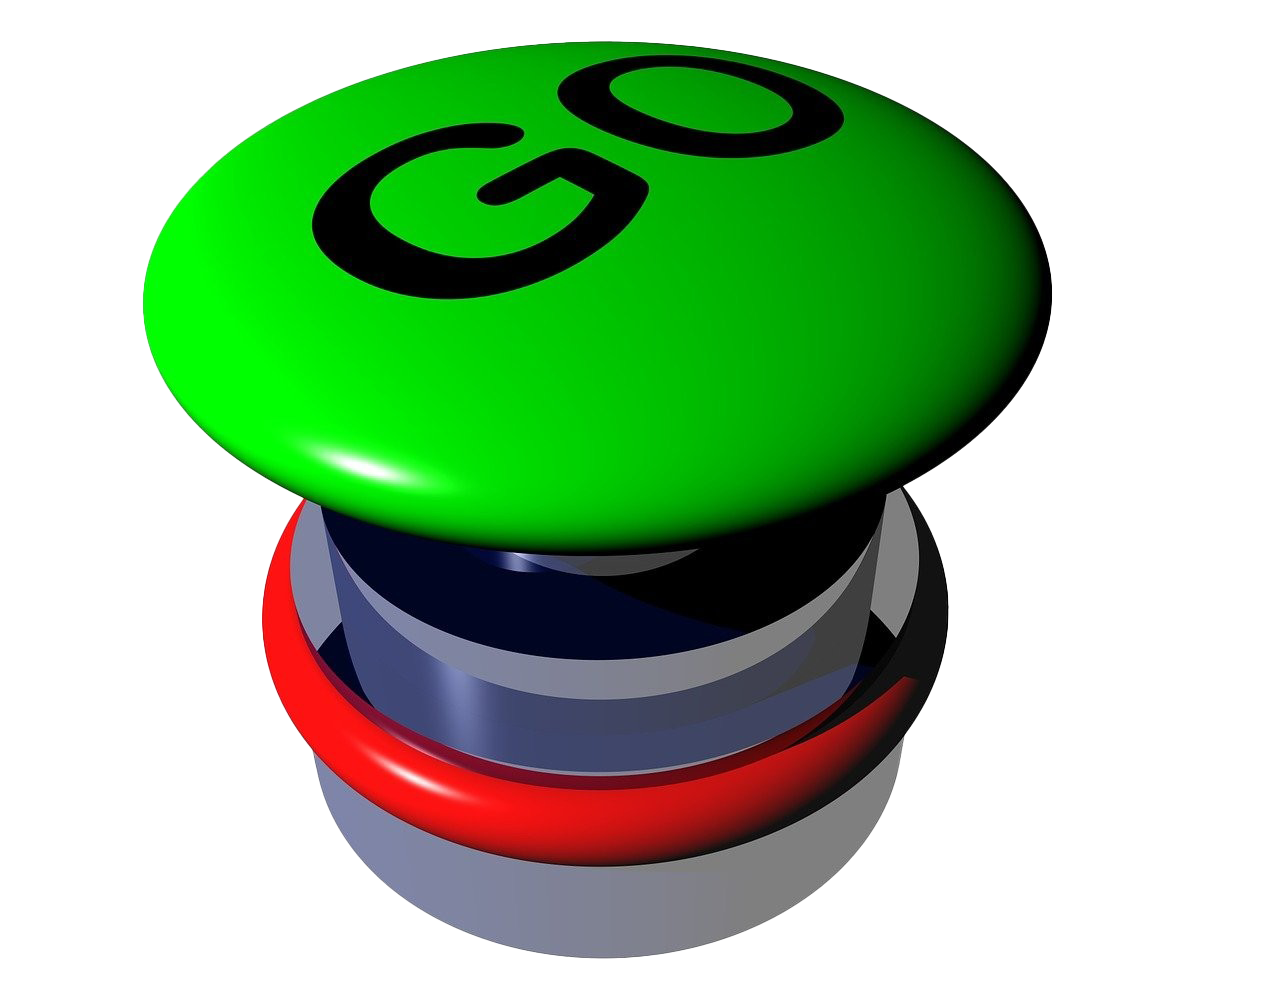 Green Go Button PNG Transparent Image